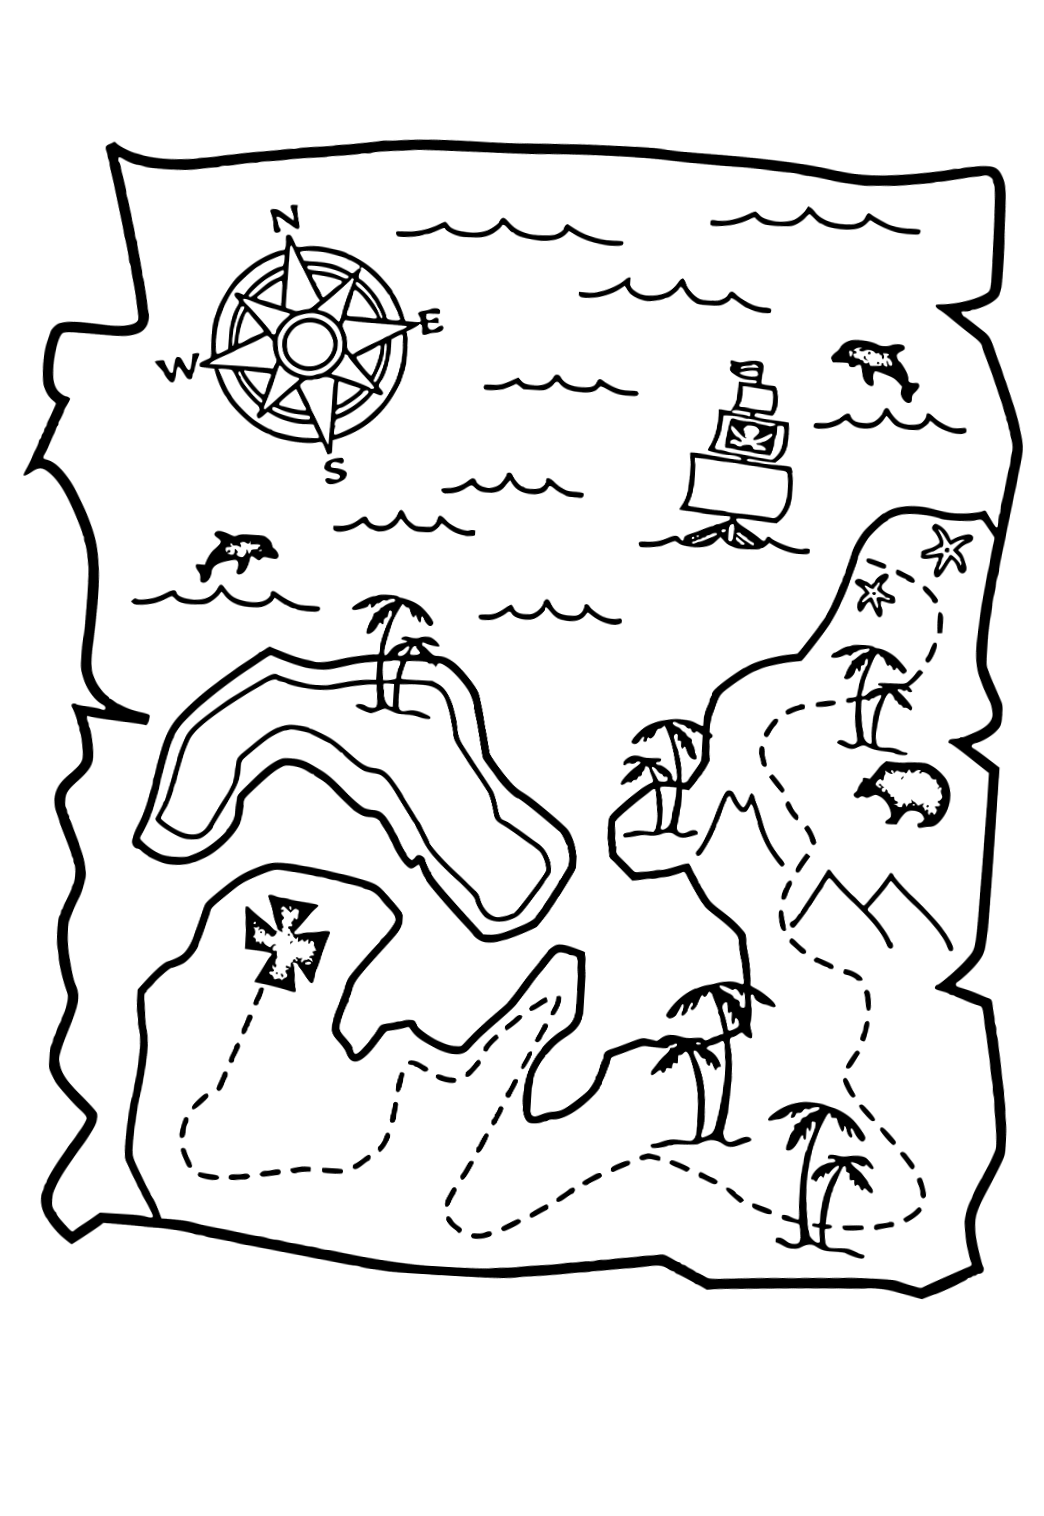 Free printable treasure map sea coloring page for adults and kids